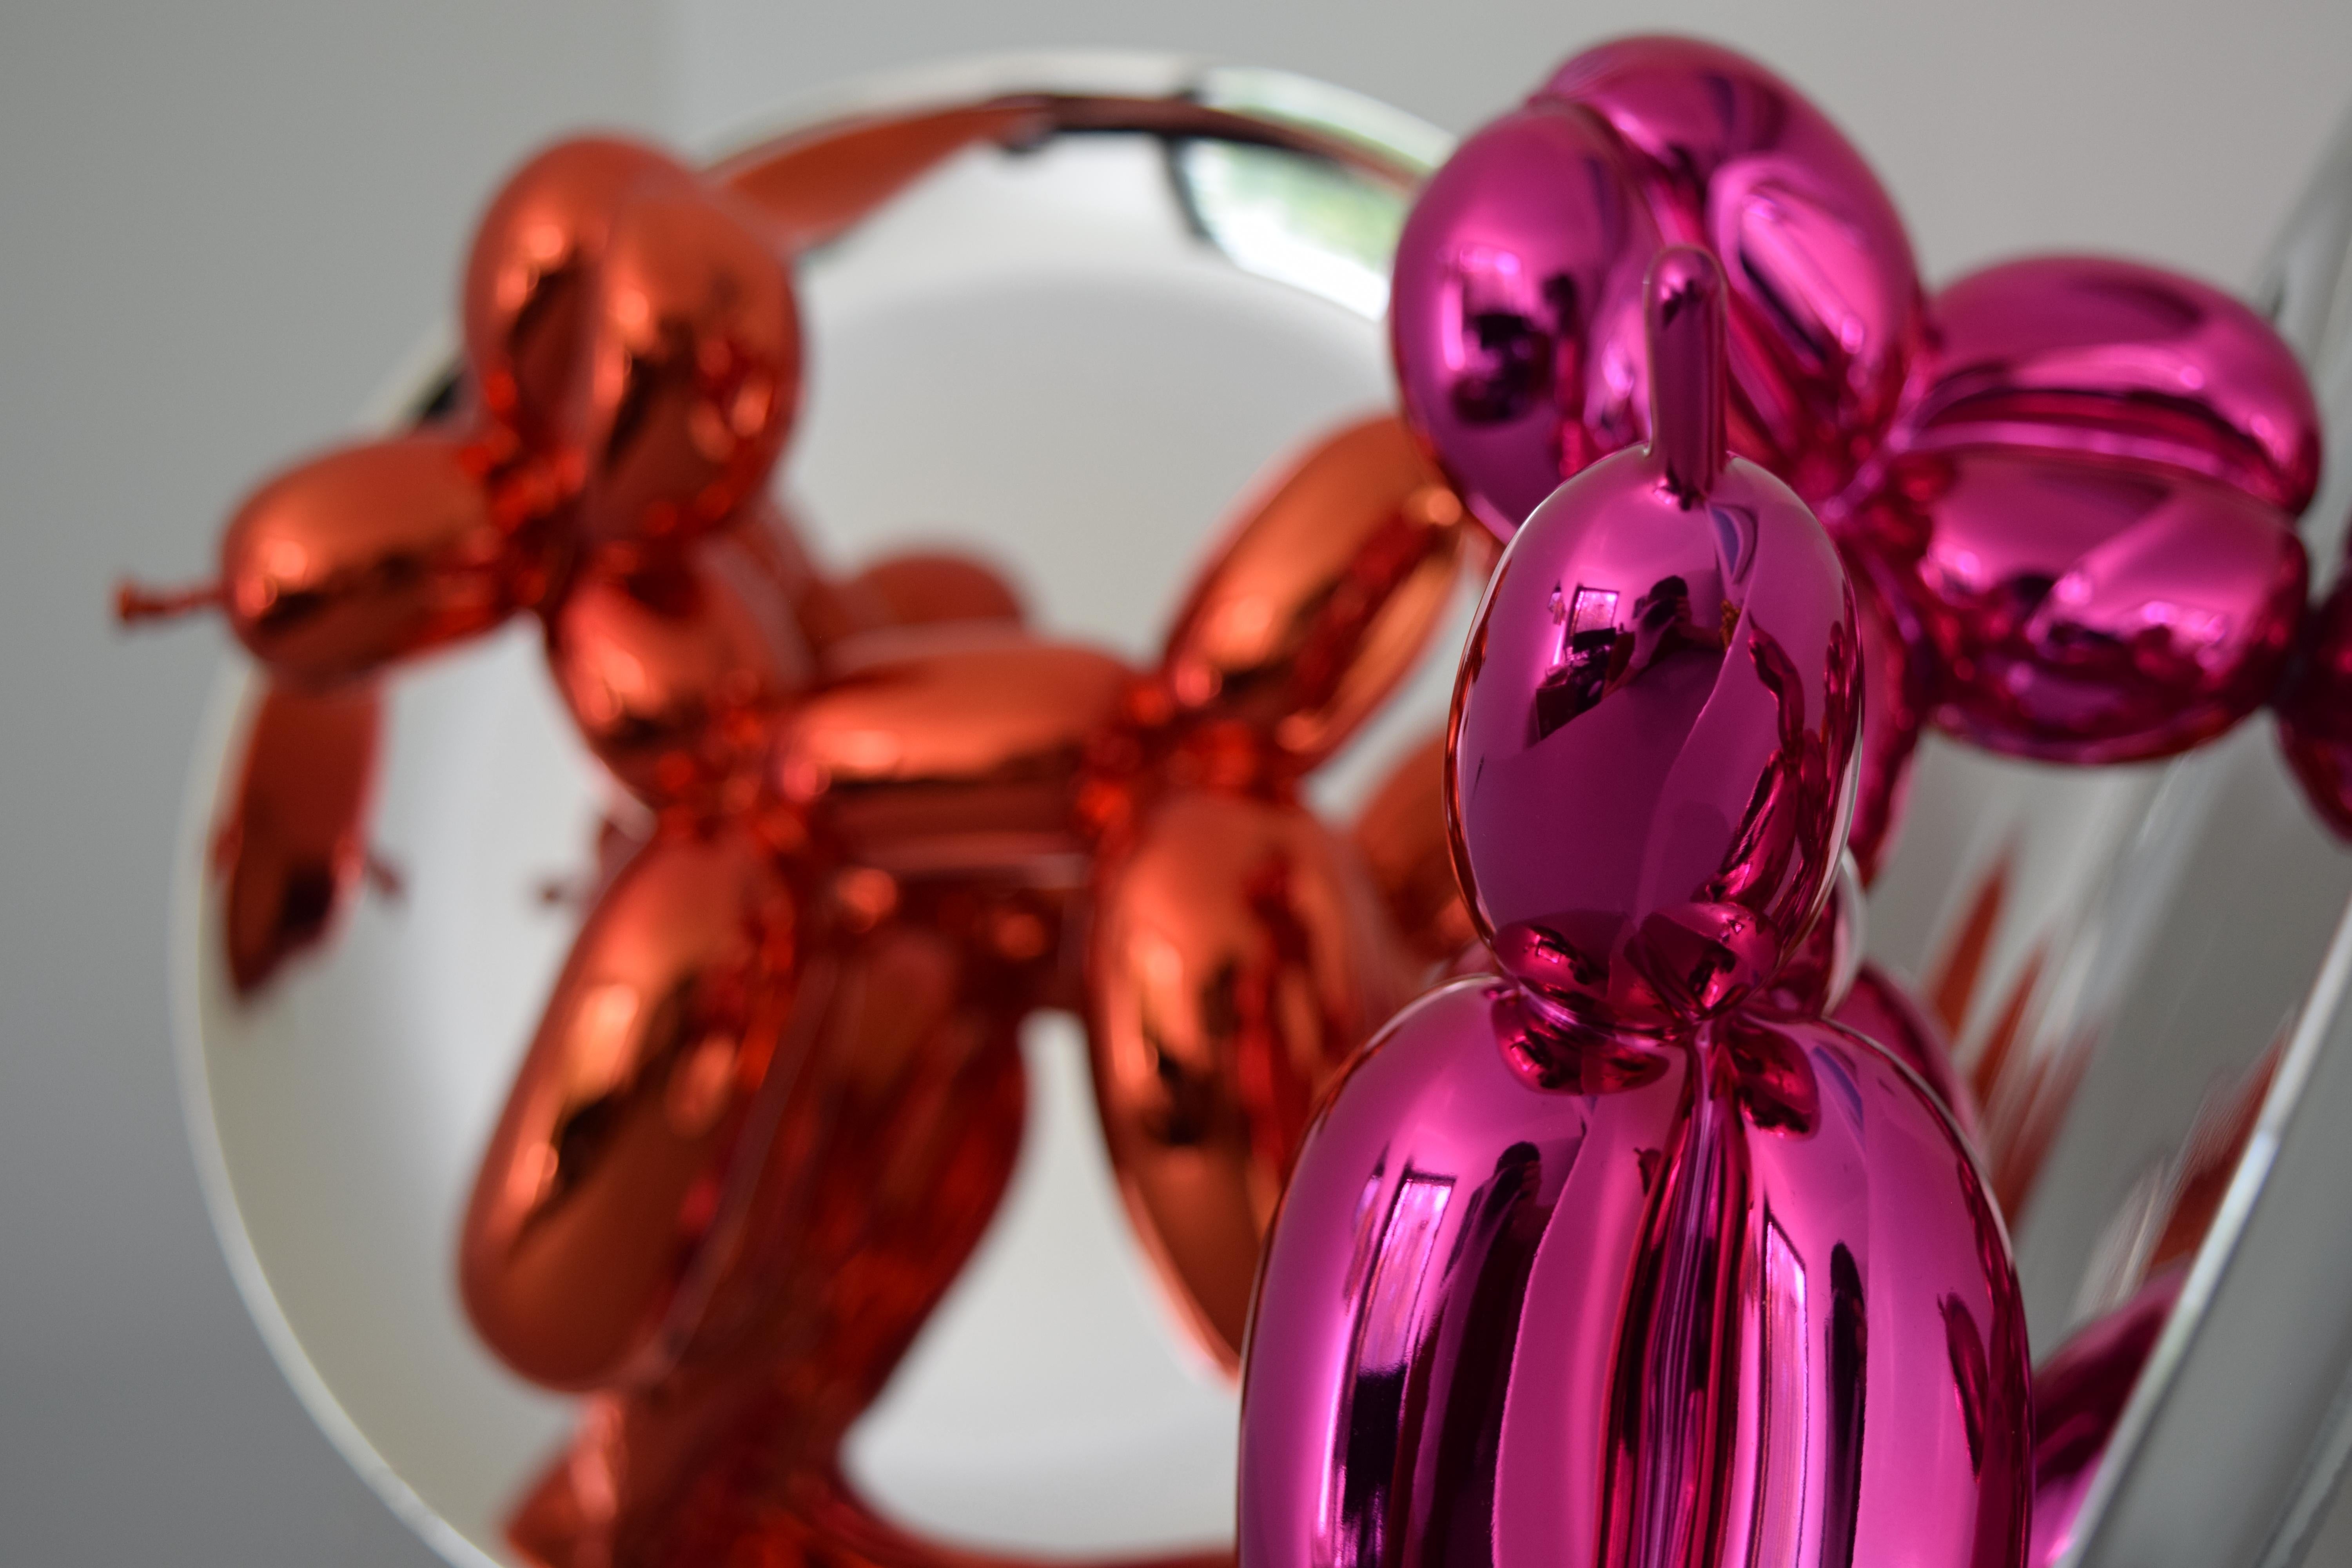 Magenta Balloon Dog Iconic Sculpture by Jeff Koons, Porcelain, Contemporary Art For Sale 16